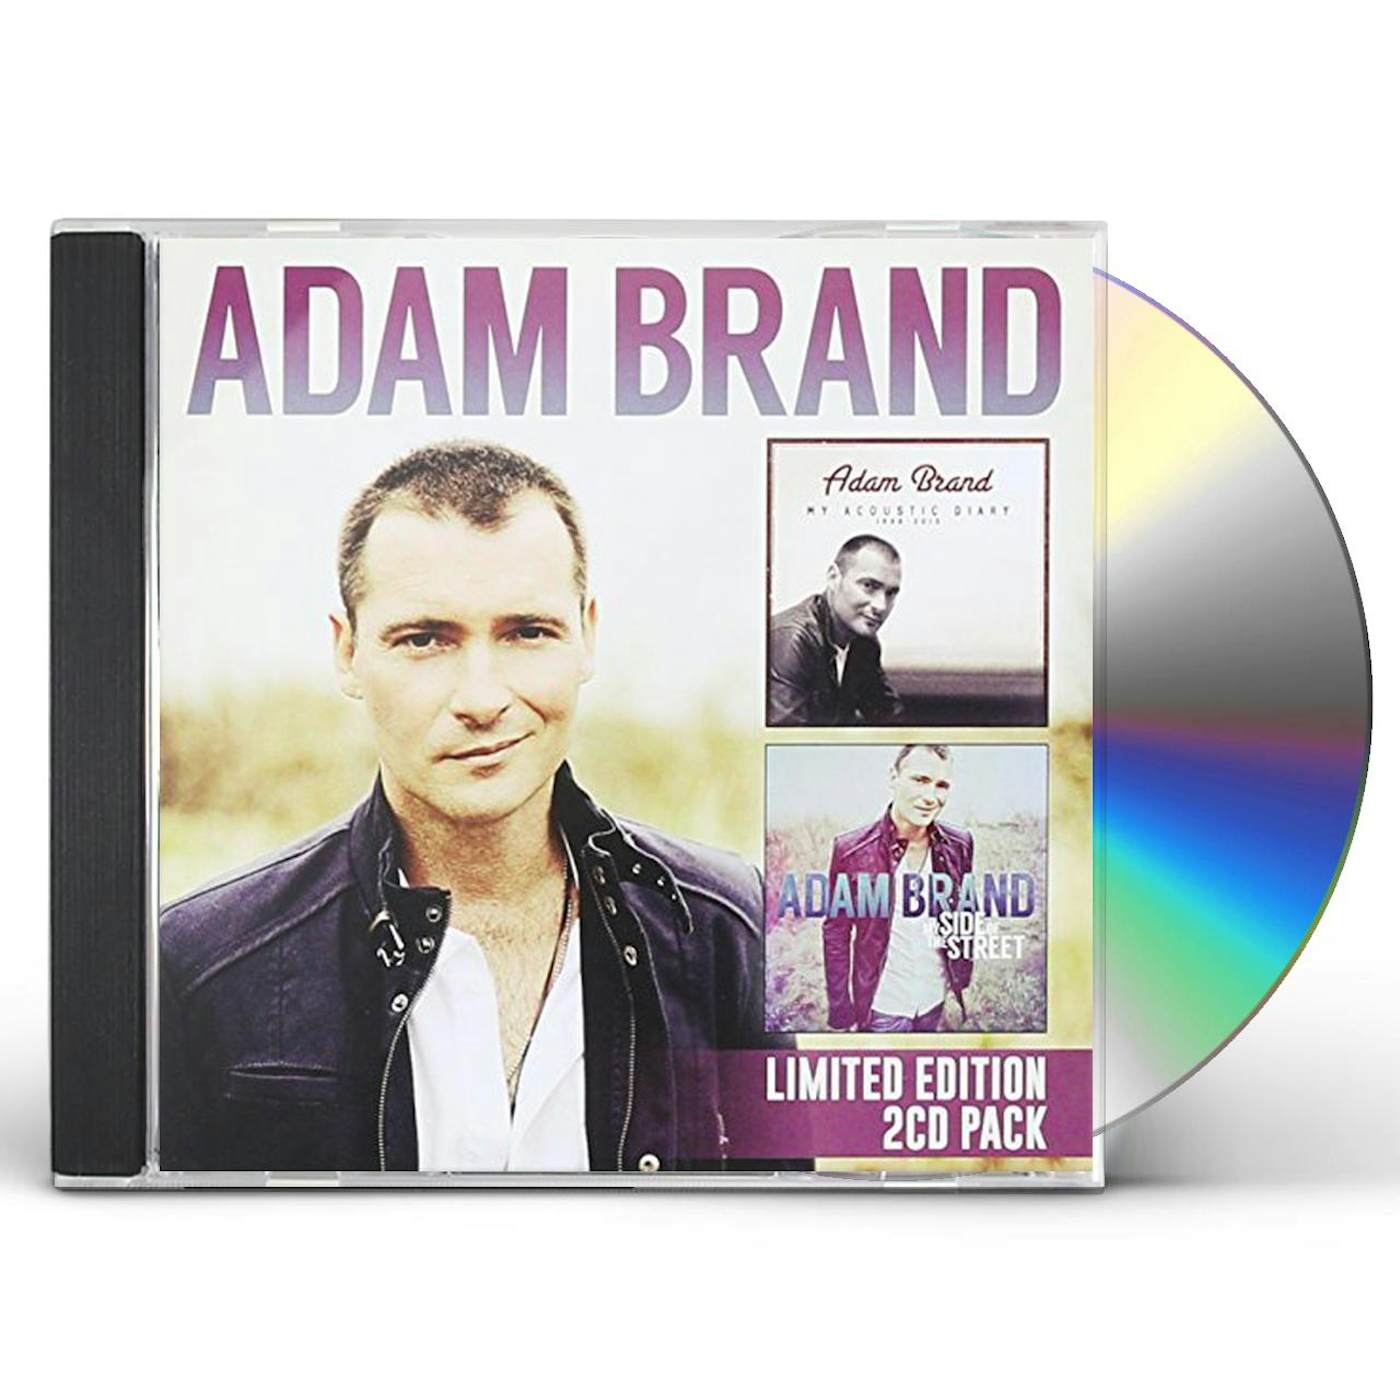 Adam Brand MY ACOUSTIC DIARY / MY SIDE OF THE STREET : DOUBLE CD